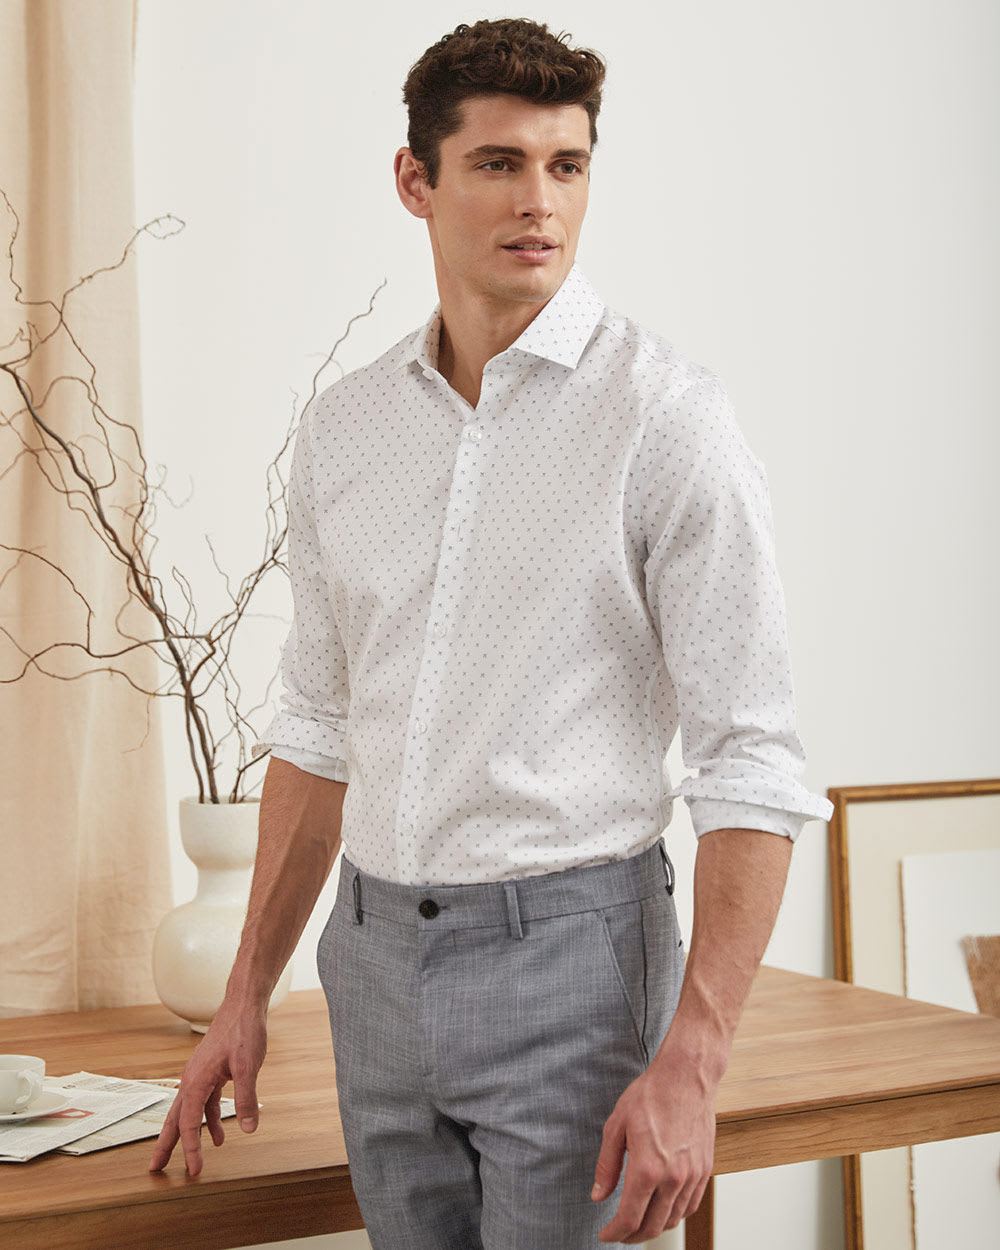 Tailored Fit Spread Collar Dotted Dress Shirt